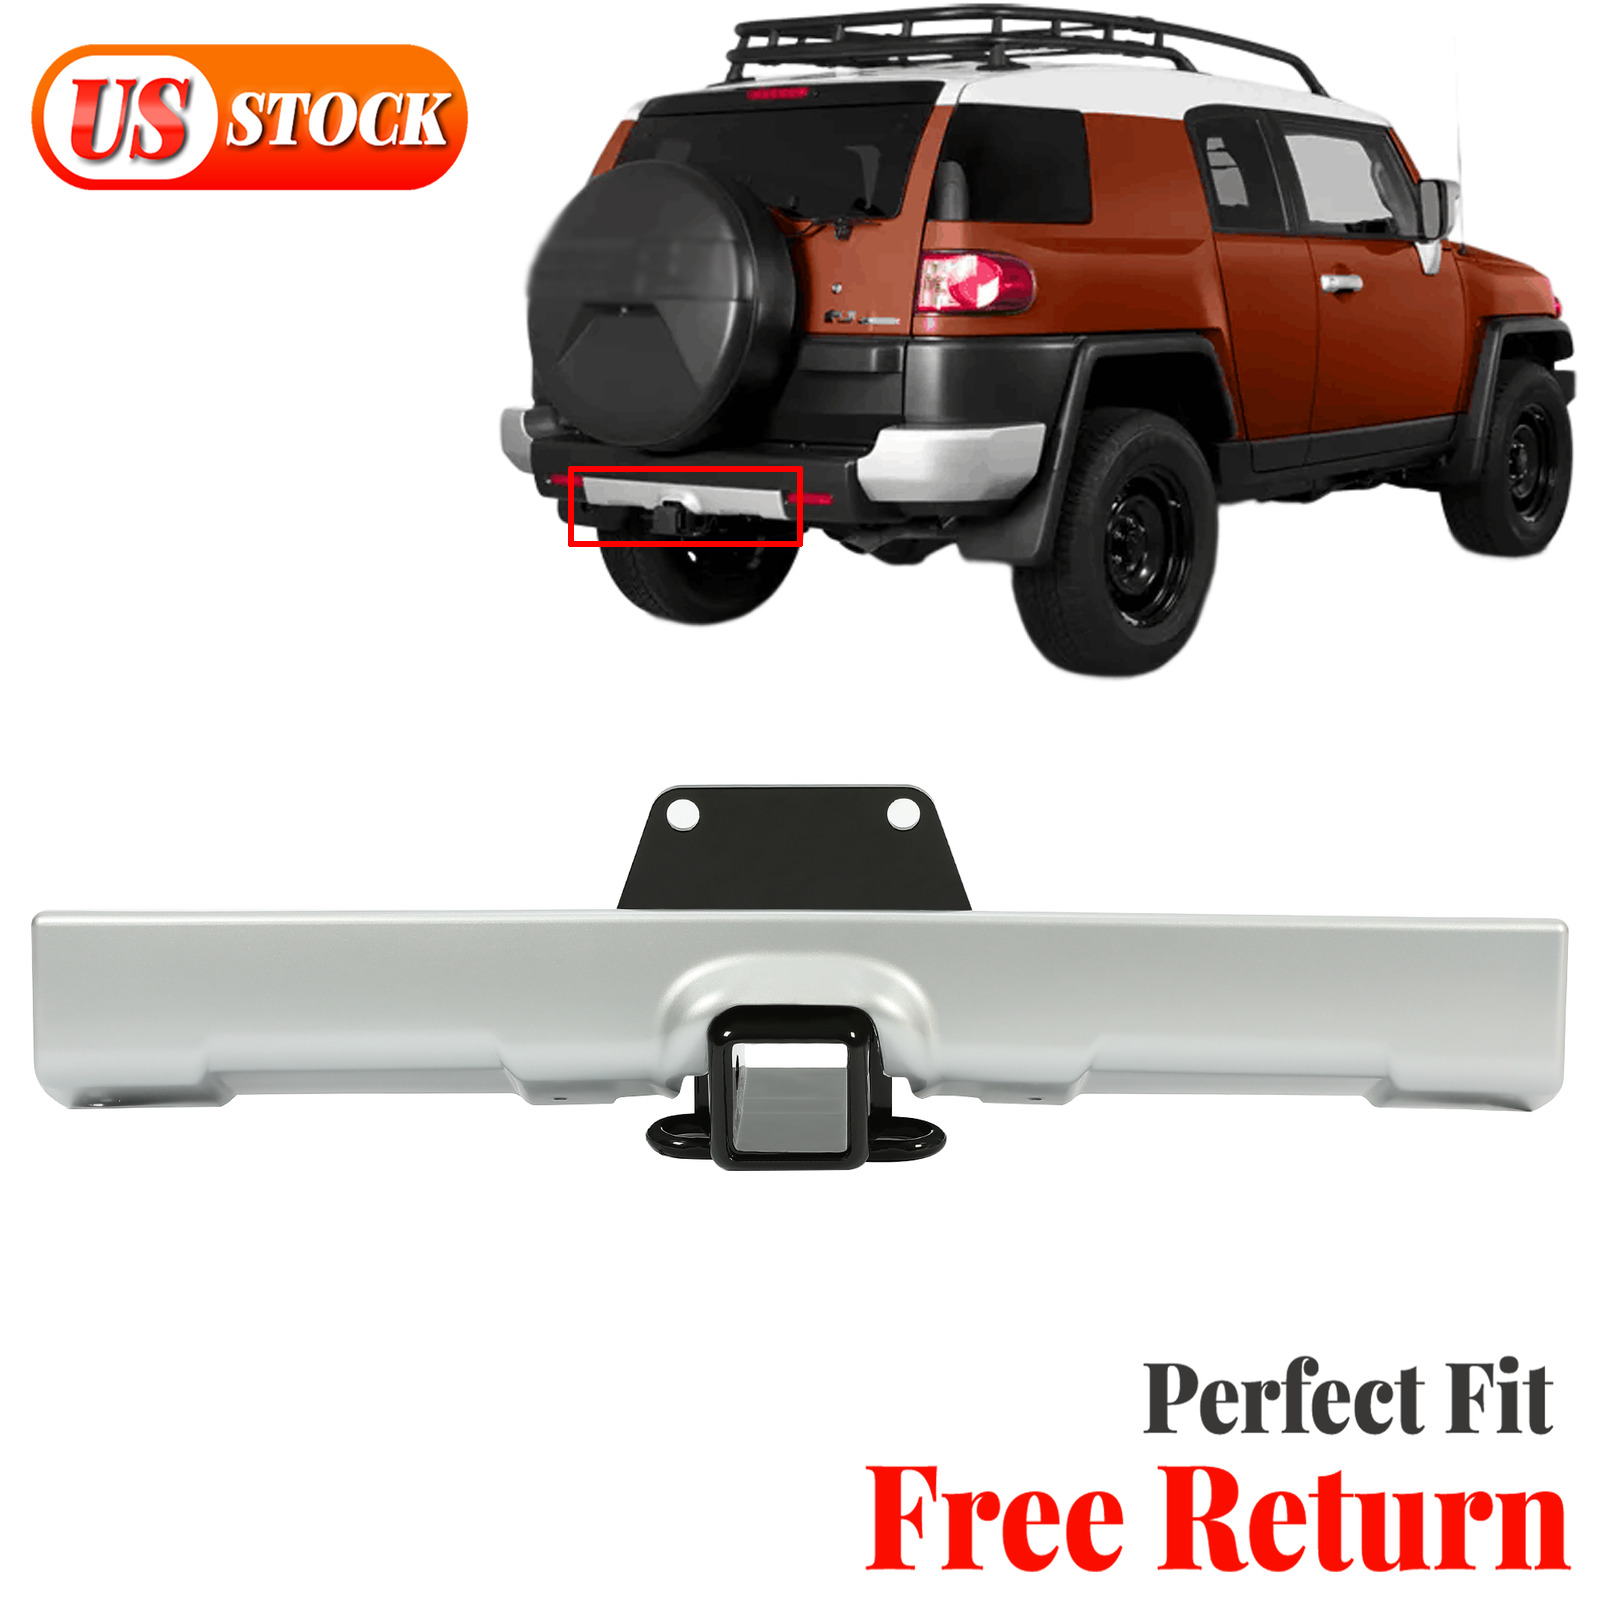 FOR TOYOTA  FJ CRUISER 07-14 TOW HITCH KIT ACCESSORY PT228-60060 New